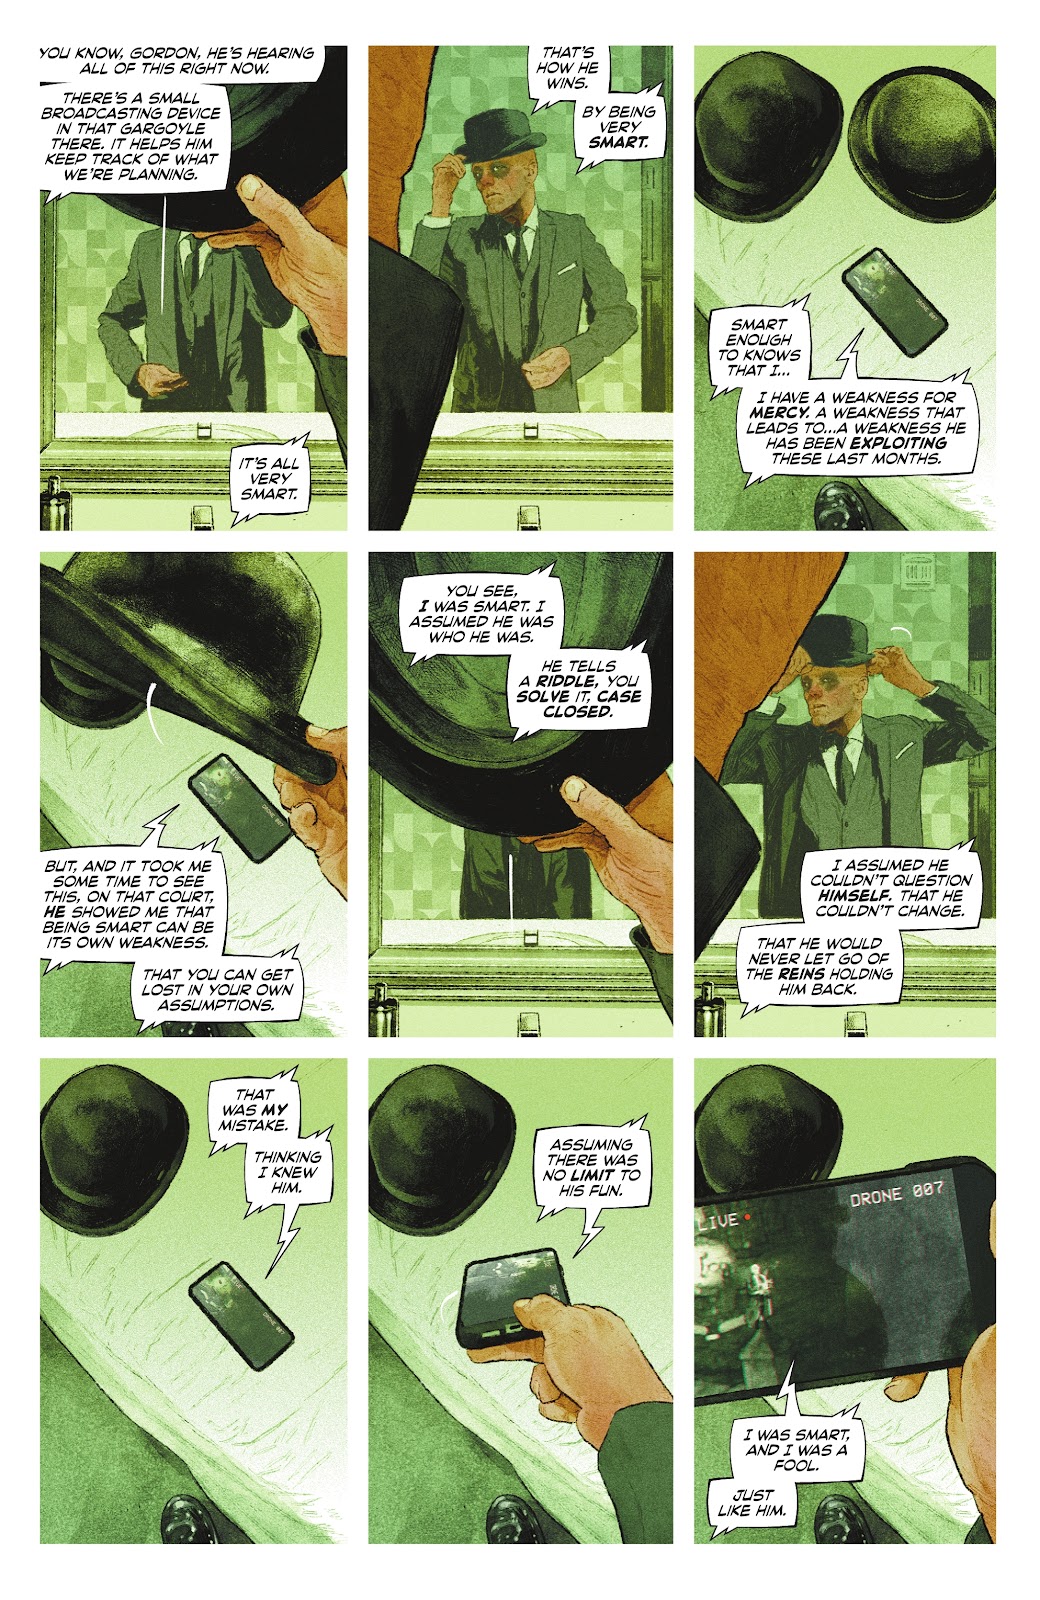 Batman: One Bad Day - The Riddler issue 1 - Page 64